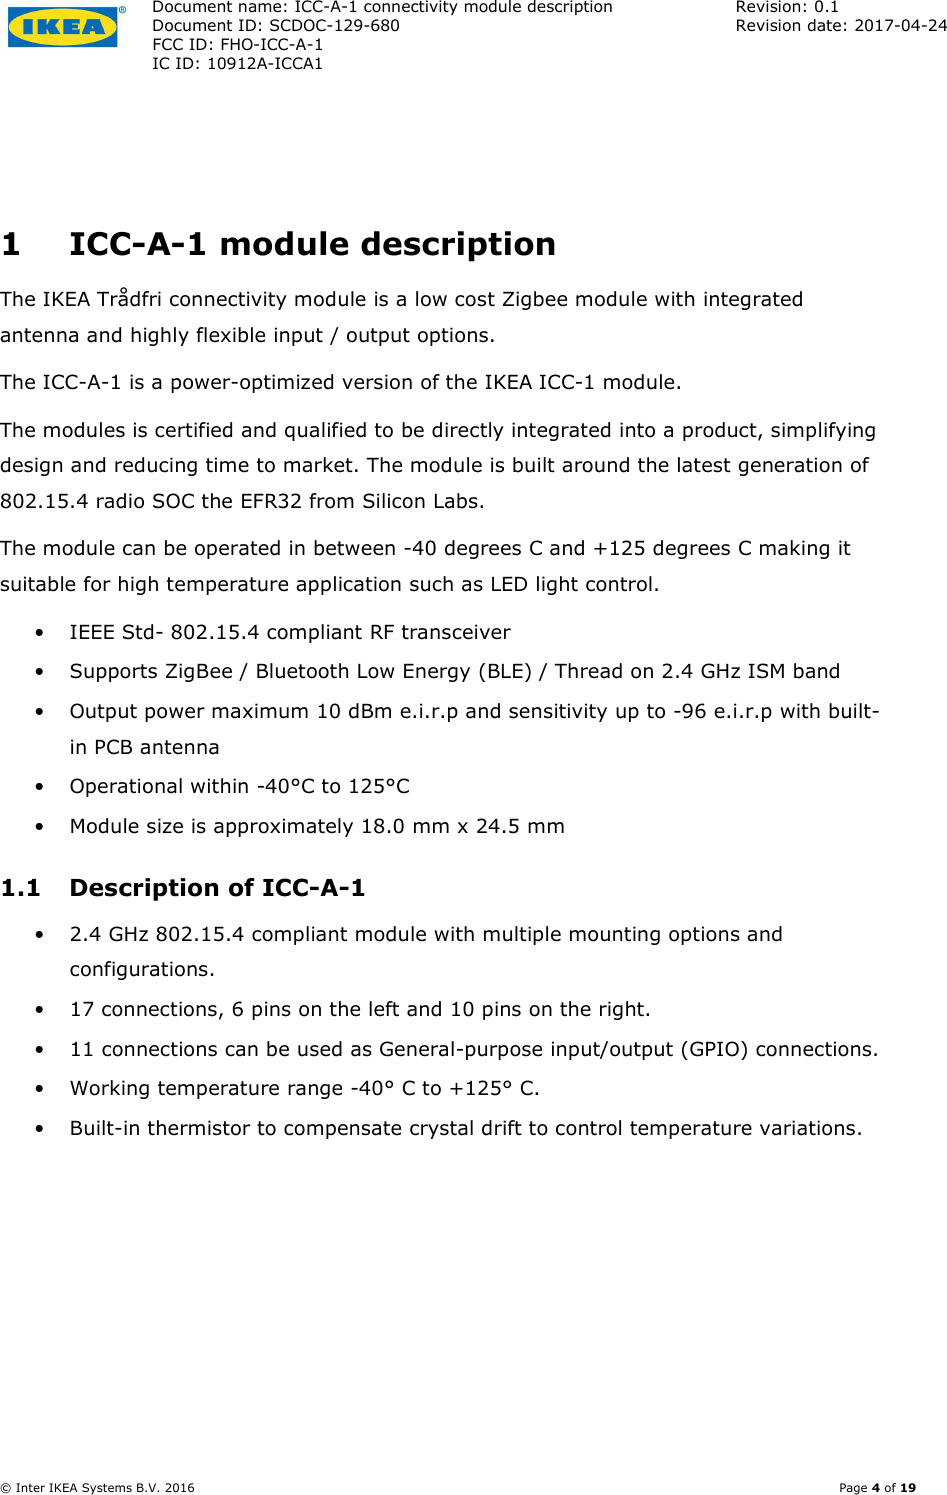 Document name: ICC-A-1 connectivity module description  Revision: 0.1 Document ID: SCDOC-129-680  Revision date: 2017-04-24  FCC ID: FHO-ICC-A-1     IC ID: 10912A-ICCA1       © Inter IKEA Systems B.V. 2016    Page 4 of 19  1 ICC-A-1 module description The IKEA Trådfri connectivity module is a low cost Zigbee module with integrated antenna and highly flexible input / output options.  The ICC-A-1 is a power-optimized version of the IKEA ICC-1 module. The modules is certified and qualified to be directly integrated into a product, simplifying design and reducing time to market. The module is built around the latest generation of 802.15.4 radio SOC the EFR32 from Silicon Labs. The module can be operated in between -40 degrees C and +125 degrees C making it suitable for high temperature application such as LED light control. • IEEE Std- 802.15.4 compliant RF transceiver • Supports ZigBee / Bluetooth Low Energy (BLE) / Thread on 2.4 GHz ISM band • Output power maximum 10 dBm e.i.r.p and sensitivity up to -96 e.i.r.p with built-in PCB antenna • Operational within -40°C to 125°C • Module size is approximately 18.0 mm x 24.5 mm 1.1 Description of ICC-A-1 • 2.4 GHz 802.15.4 compliant module with multiple mounting options and configurations. • 17 connections, 6 pins on the left and 10 pins on the right. • 11 connections can be used as General-purpose input/output (GPIO) connections. • Working temperature range -40° C to +125° C. • Built-in thermistor to compensate crystal drift to control temperature variations. 